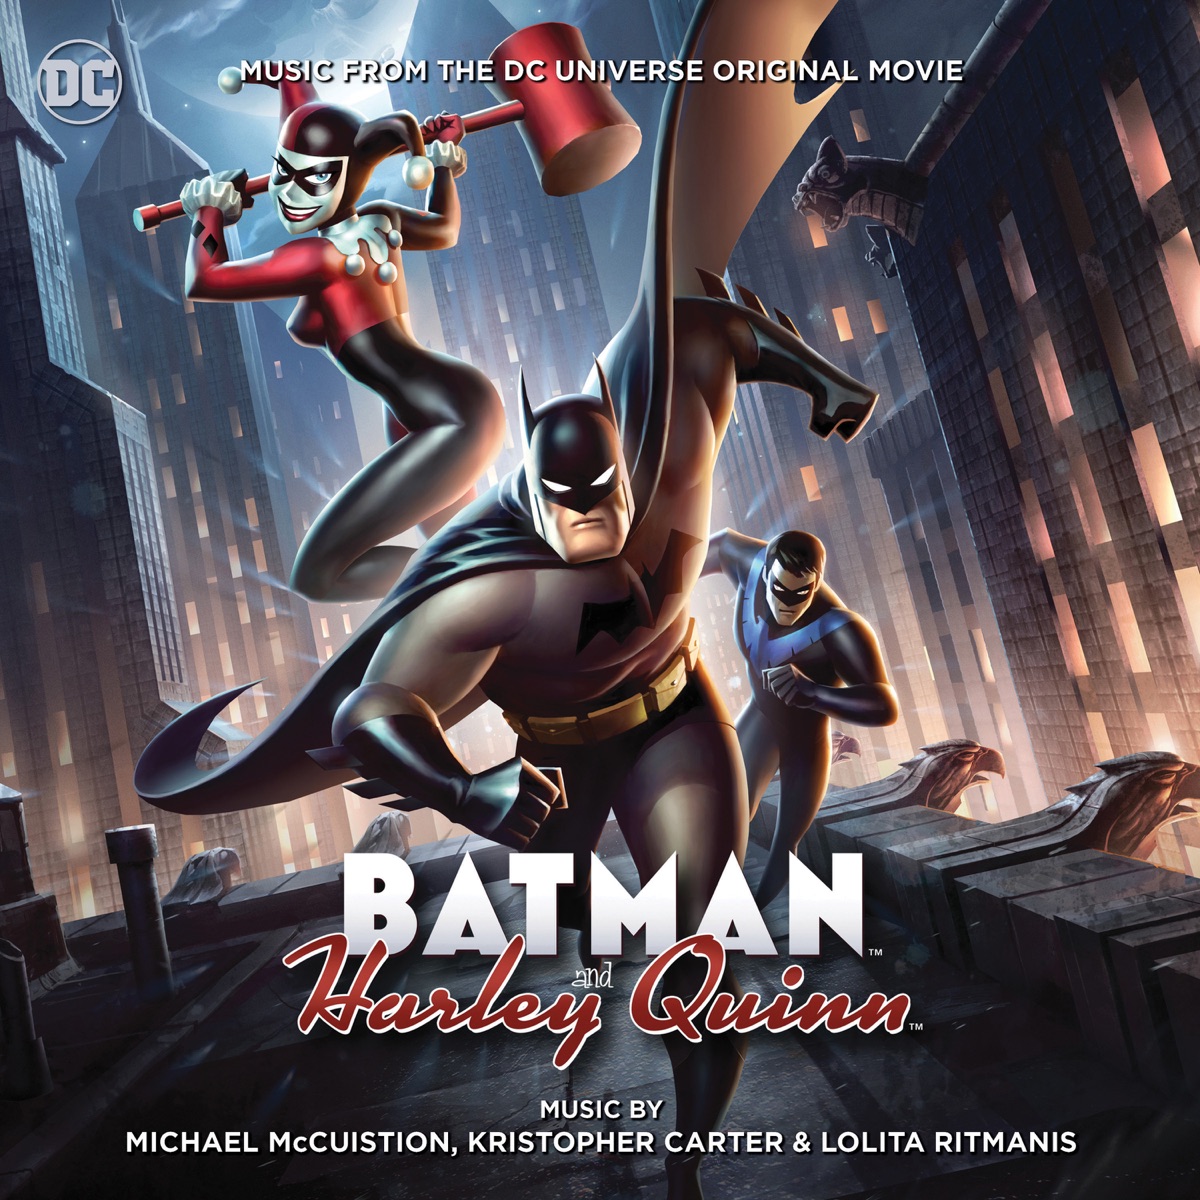 Batman: Return of the Caped Crusaders (Music from the DC Classic Original  Movie) by Kristopher Carter, Lolita Ritmanis & Michael McCuistion on Apple  Music